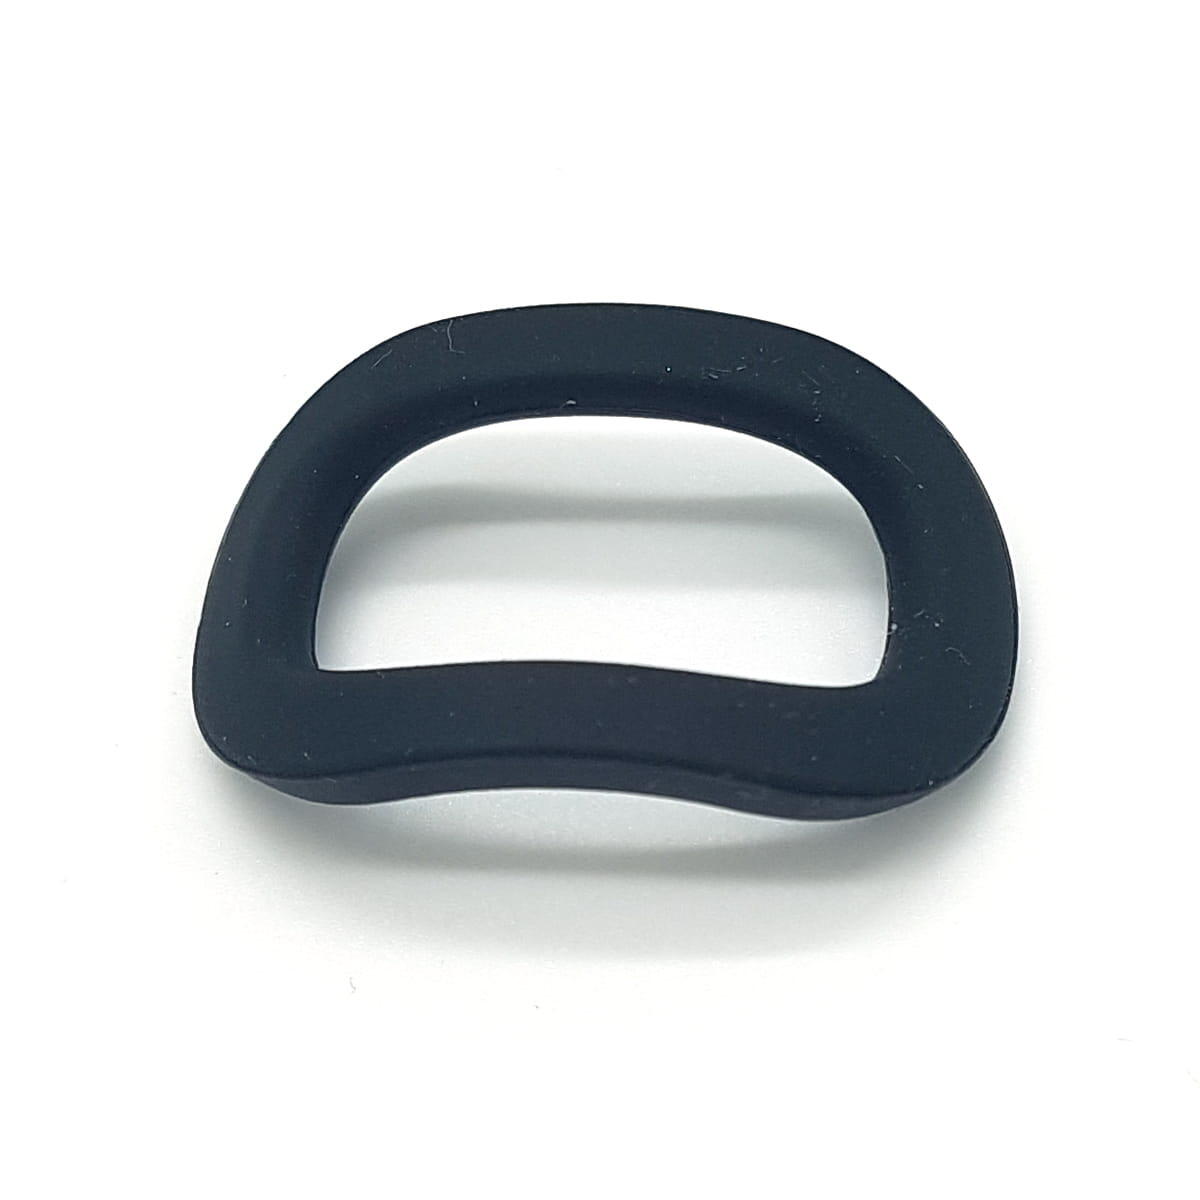 Knog Blinder Mini/Mob/R70 Replacement Strap Long 1/1